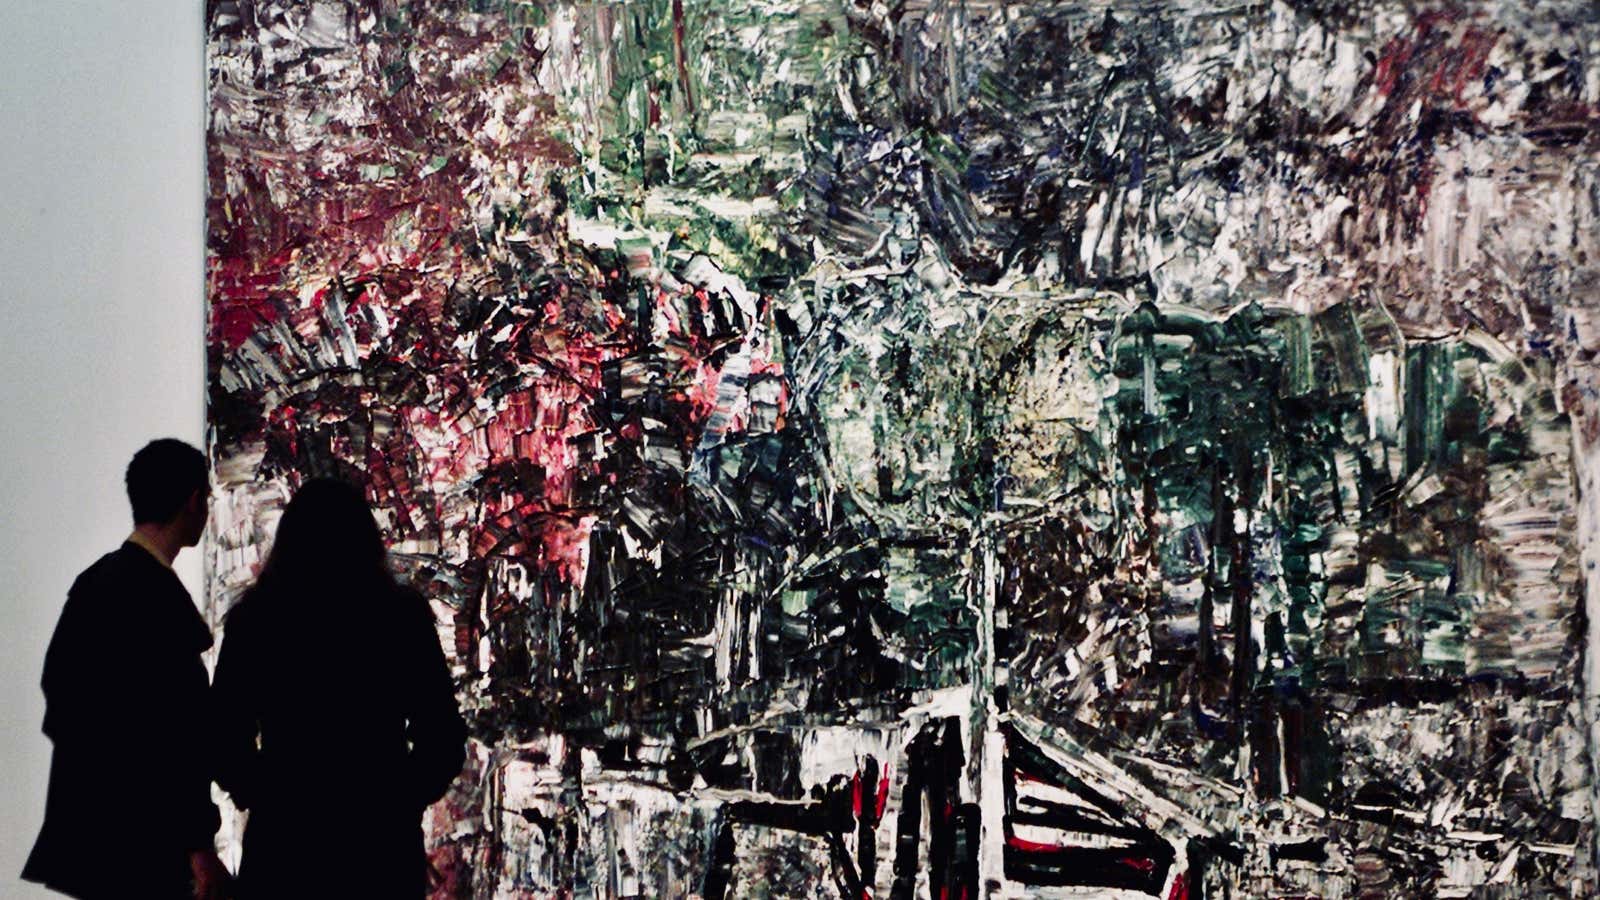 The 1970 painting “Homage to Grey Owl” by Canadian artist Jean-Paul Riopelle at the Montreal Museum of Fine Arts.